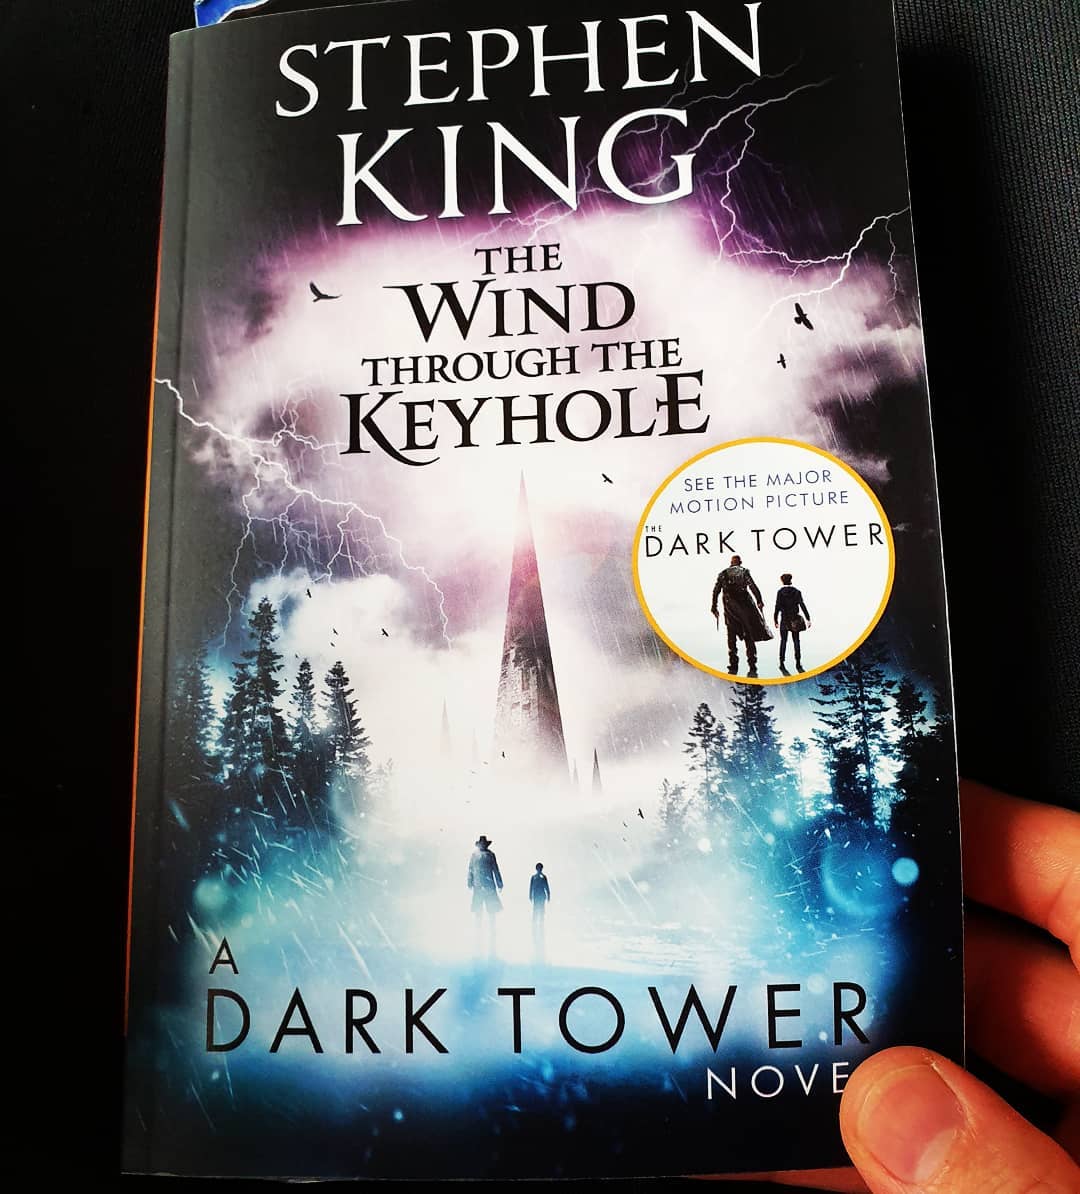 Stephen King: The Wind Through the Keyhole (A Stand-Alone Dark Tower Novel)